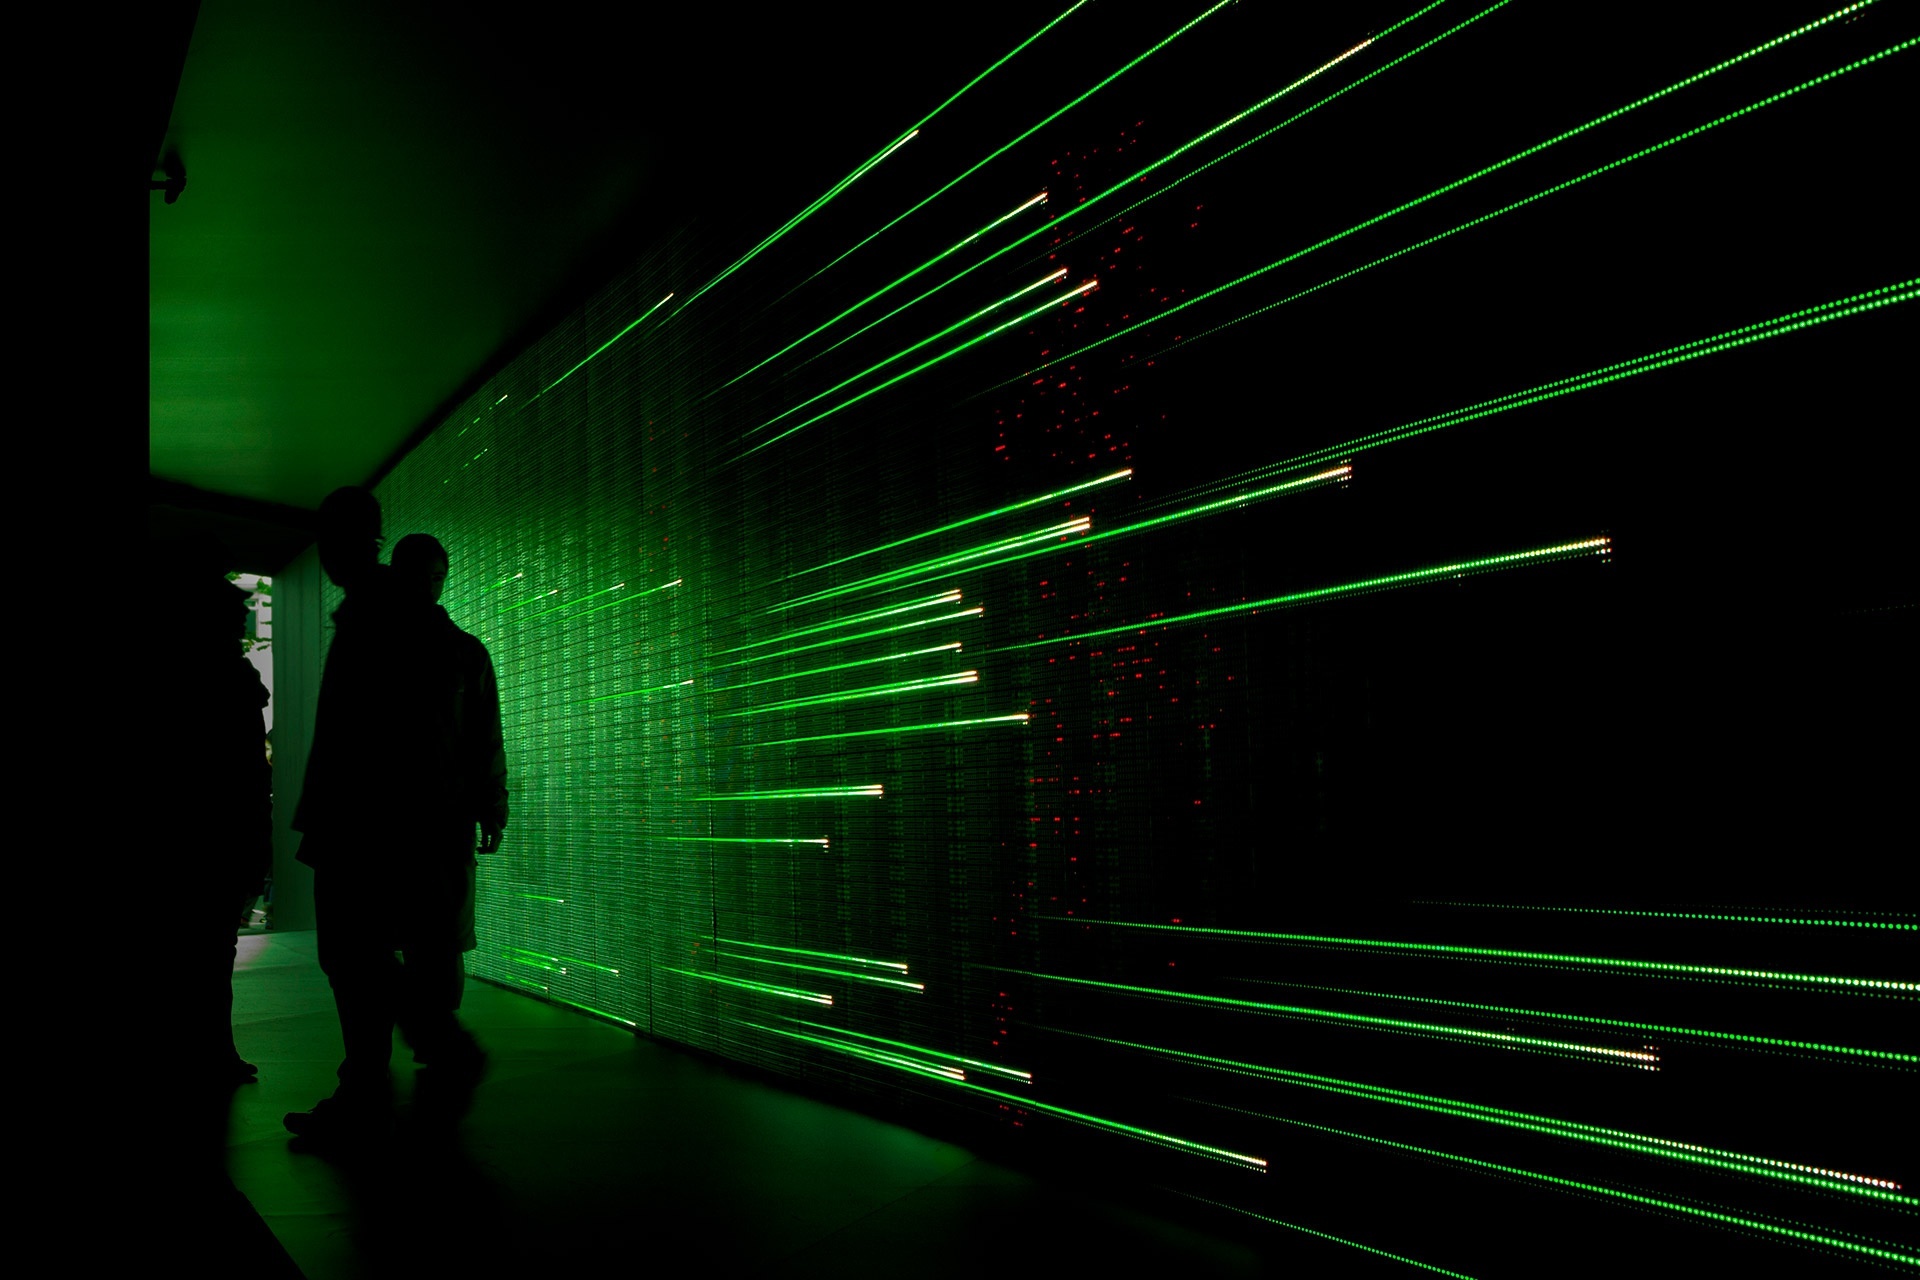 People in a dark space in front of digital surface that has thin green lines running across it.